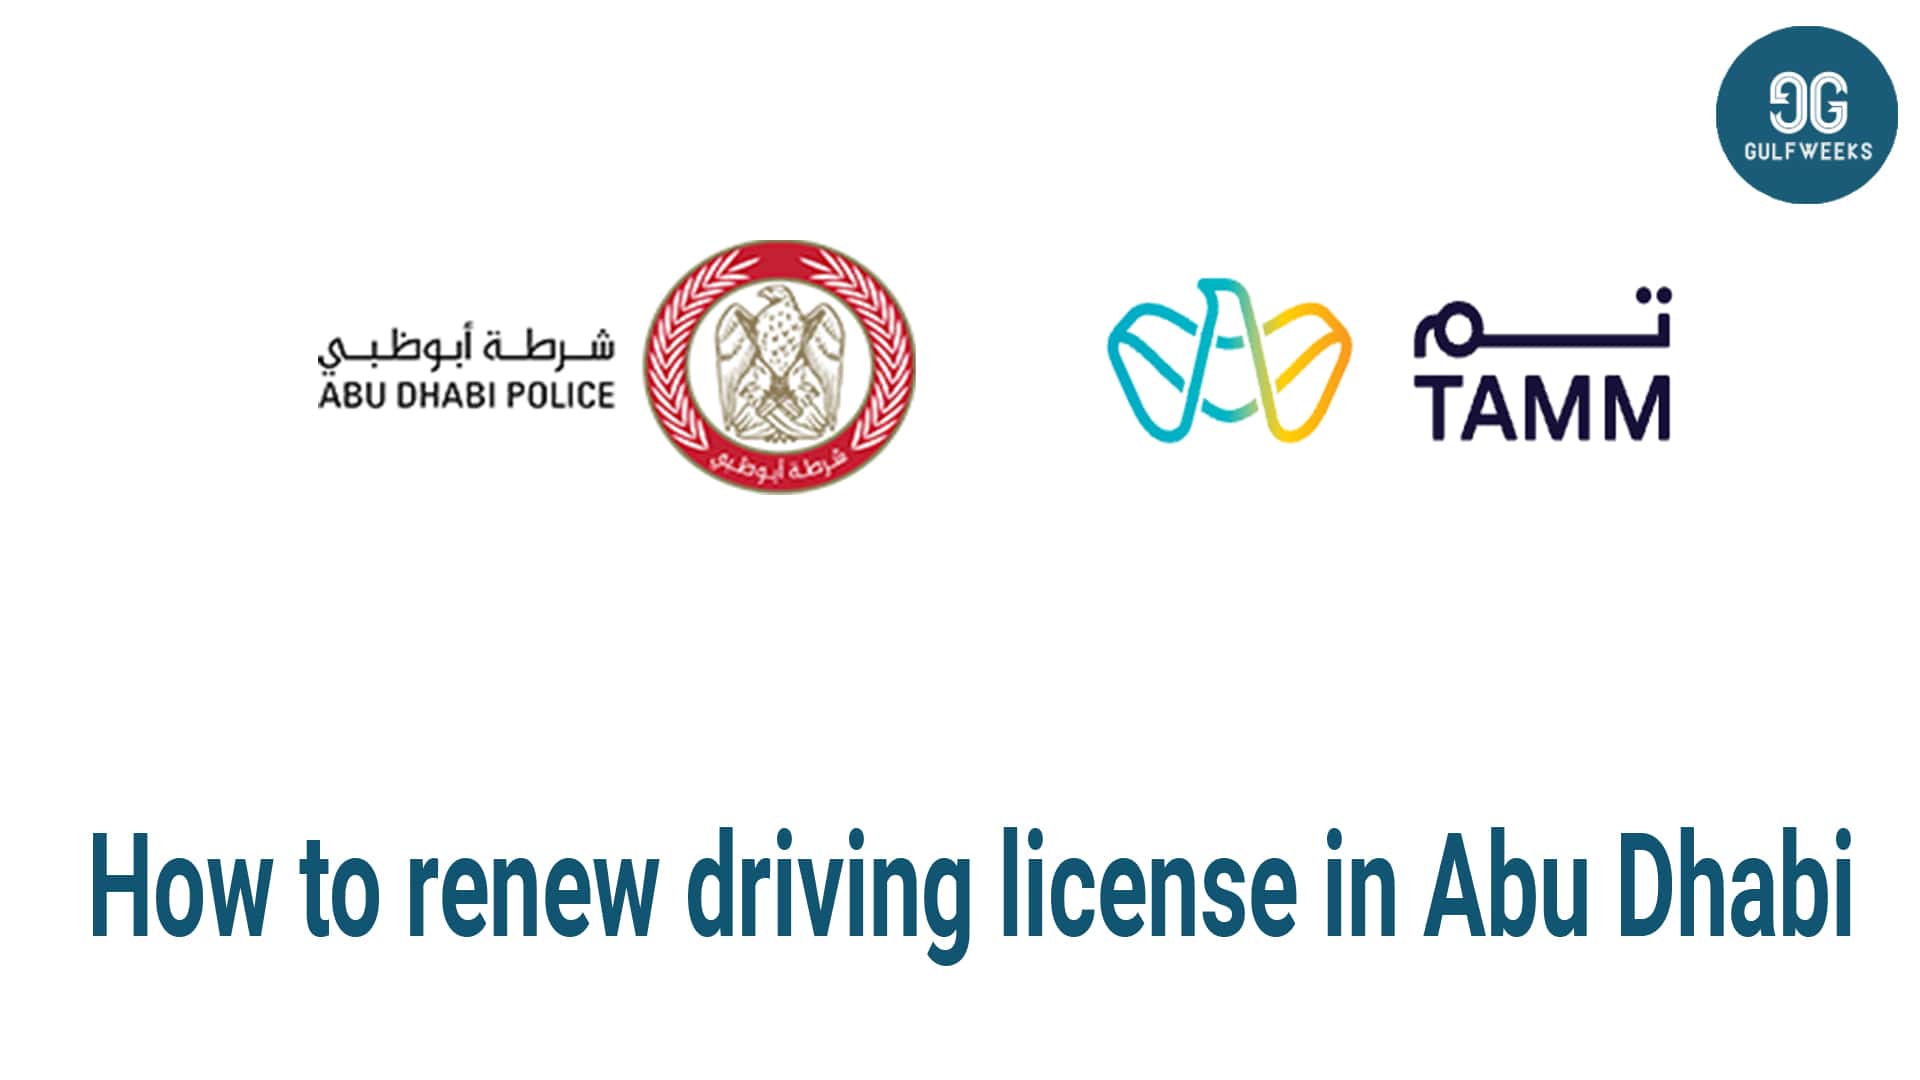 How to renew driving license in Abu Dhabi